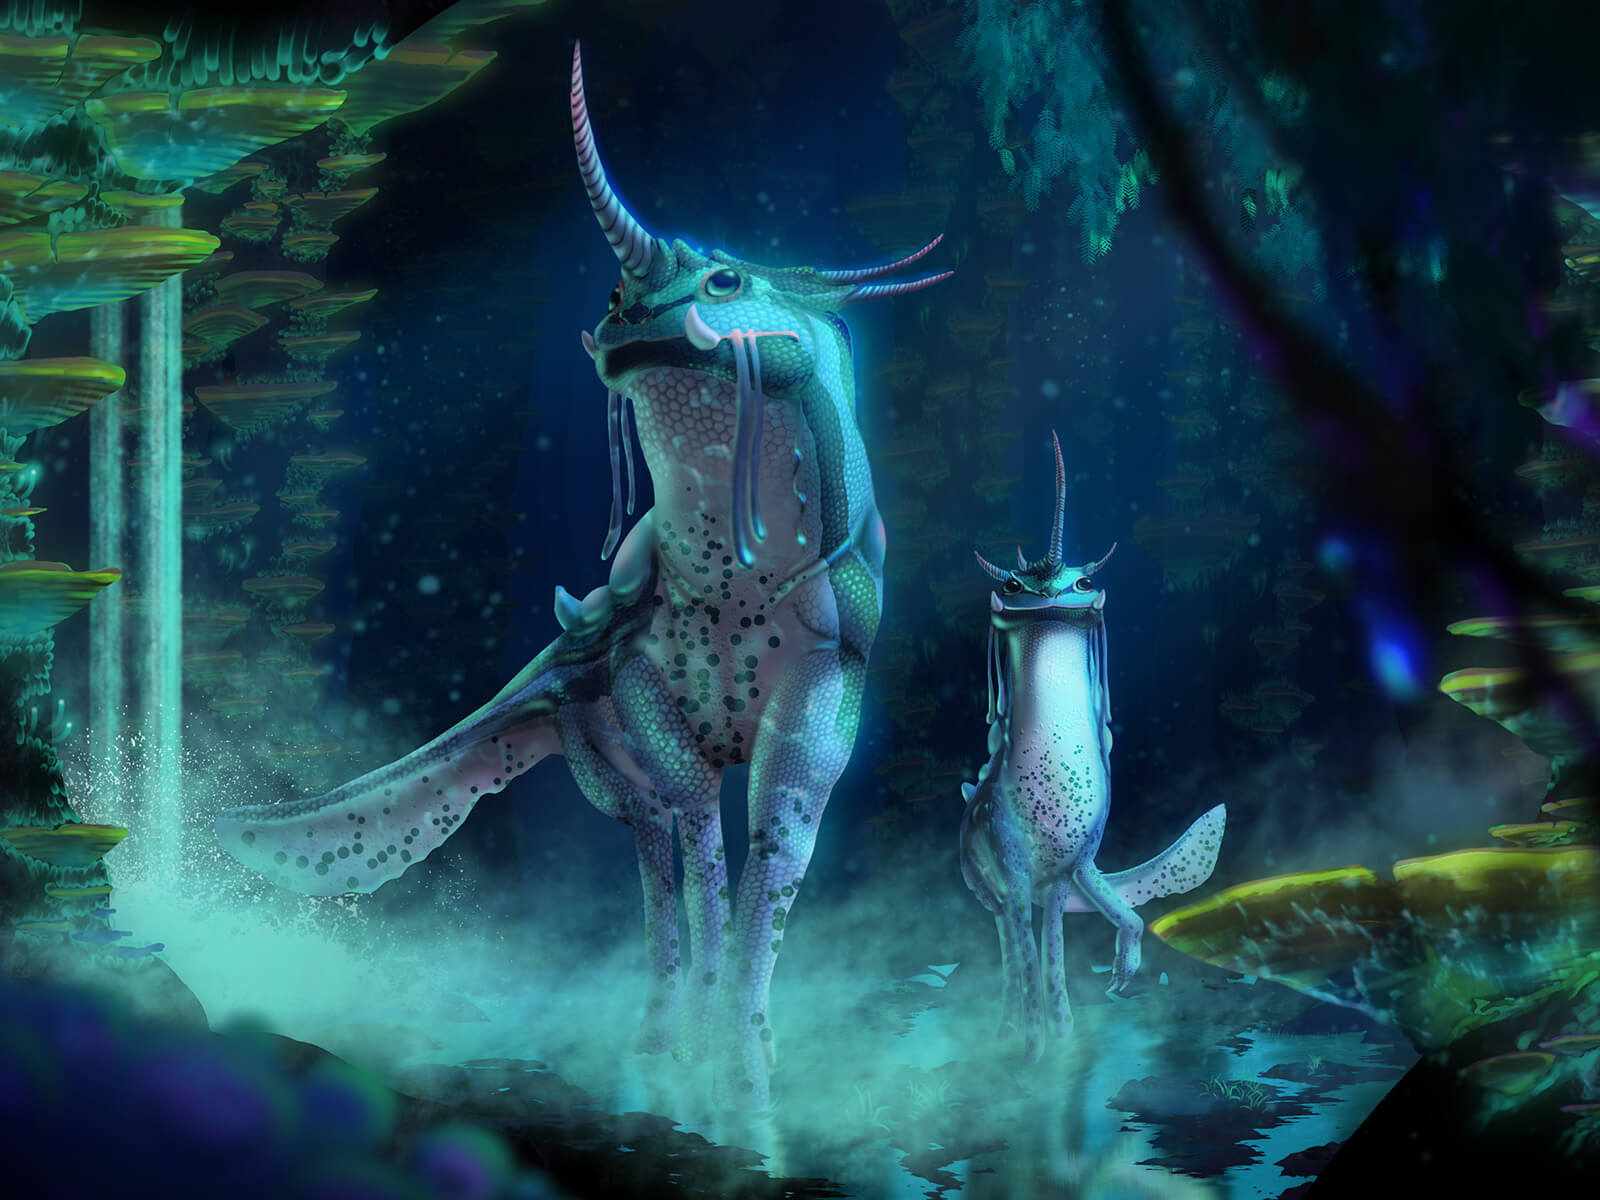 computer-generated 3D models of two unicorn-lizard hybrid animals in a mystical blue and green forest